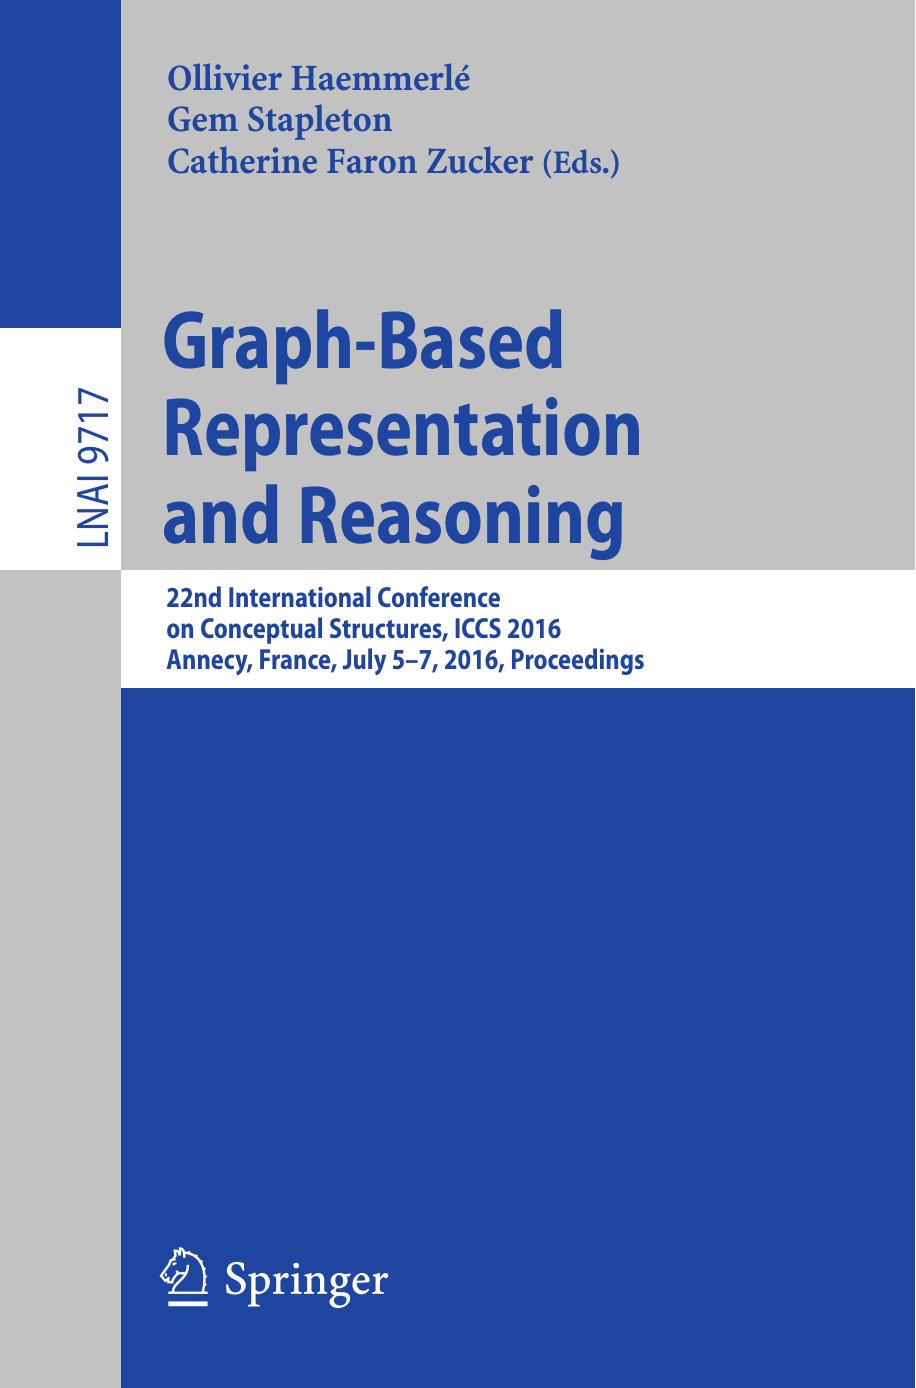 Graph-Based Representation and Reasoning: 22nd International Conference on Conceptual Structures, ICCS 2016, Annecy, France, July 5-7, 2016, Proceedings